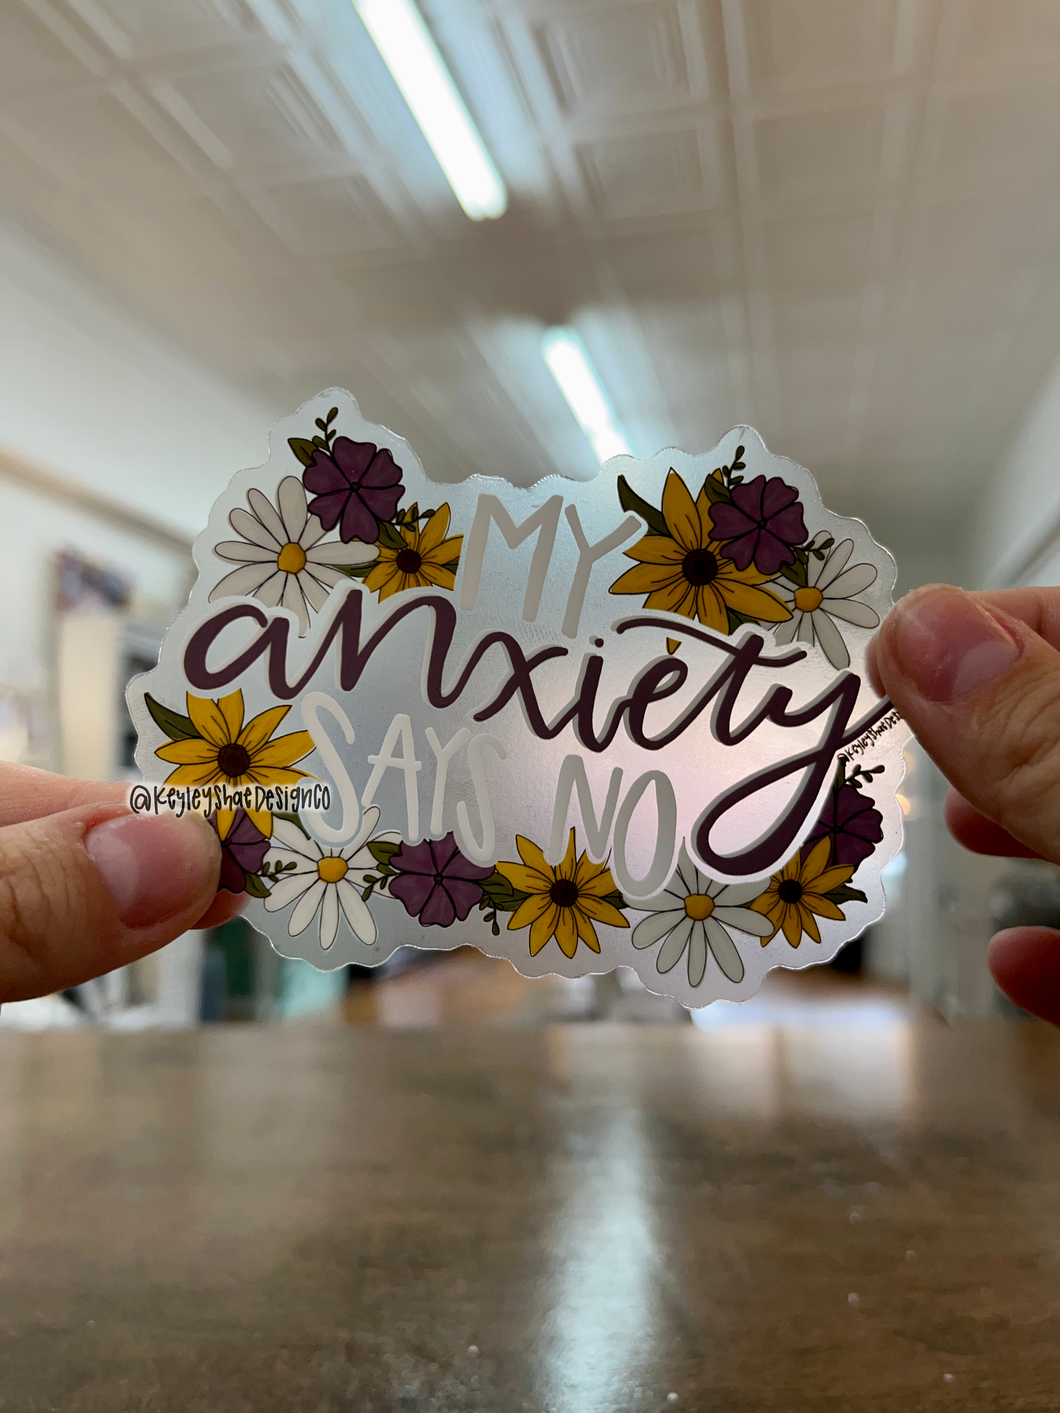 My Anxiety Says No Clear Backing Sticker